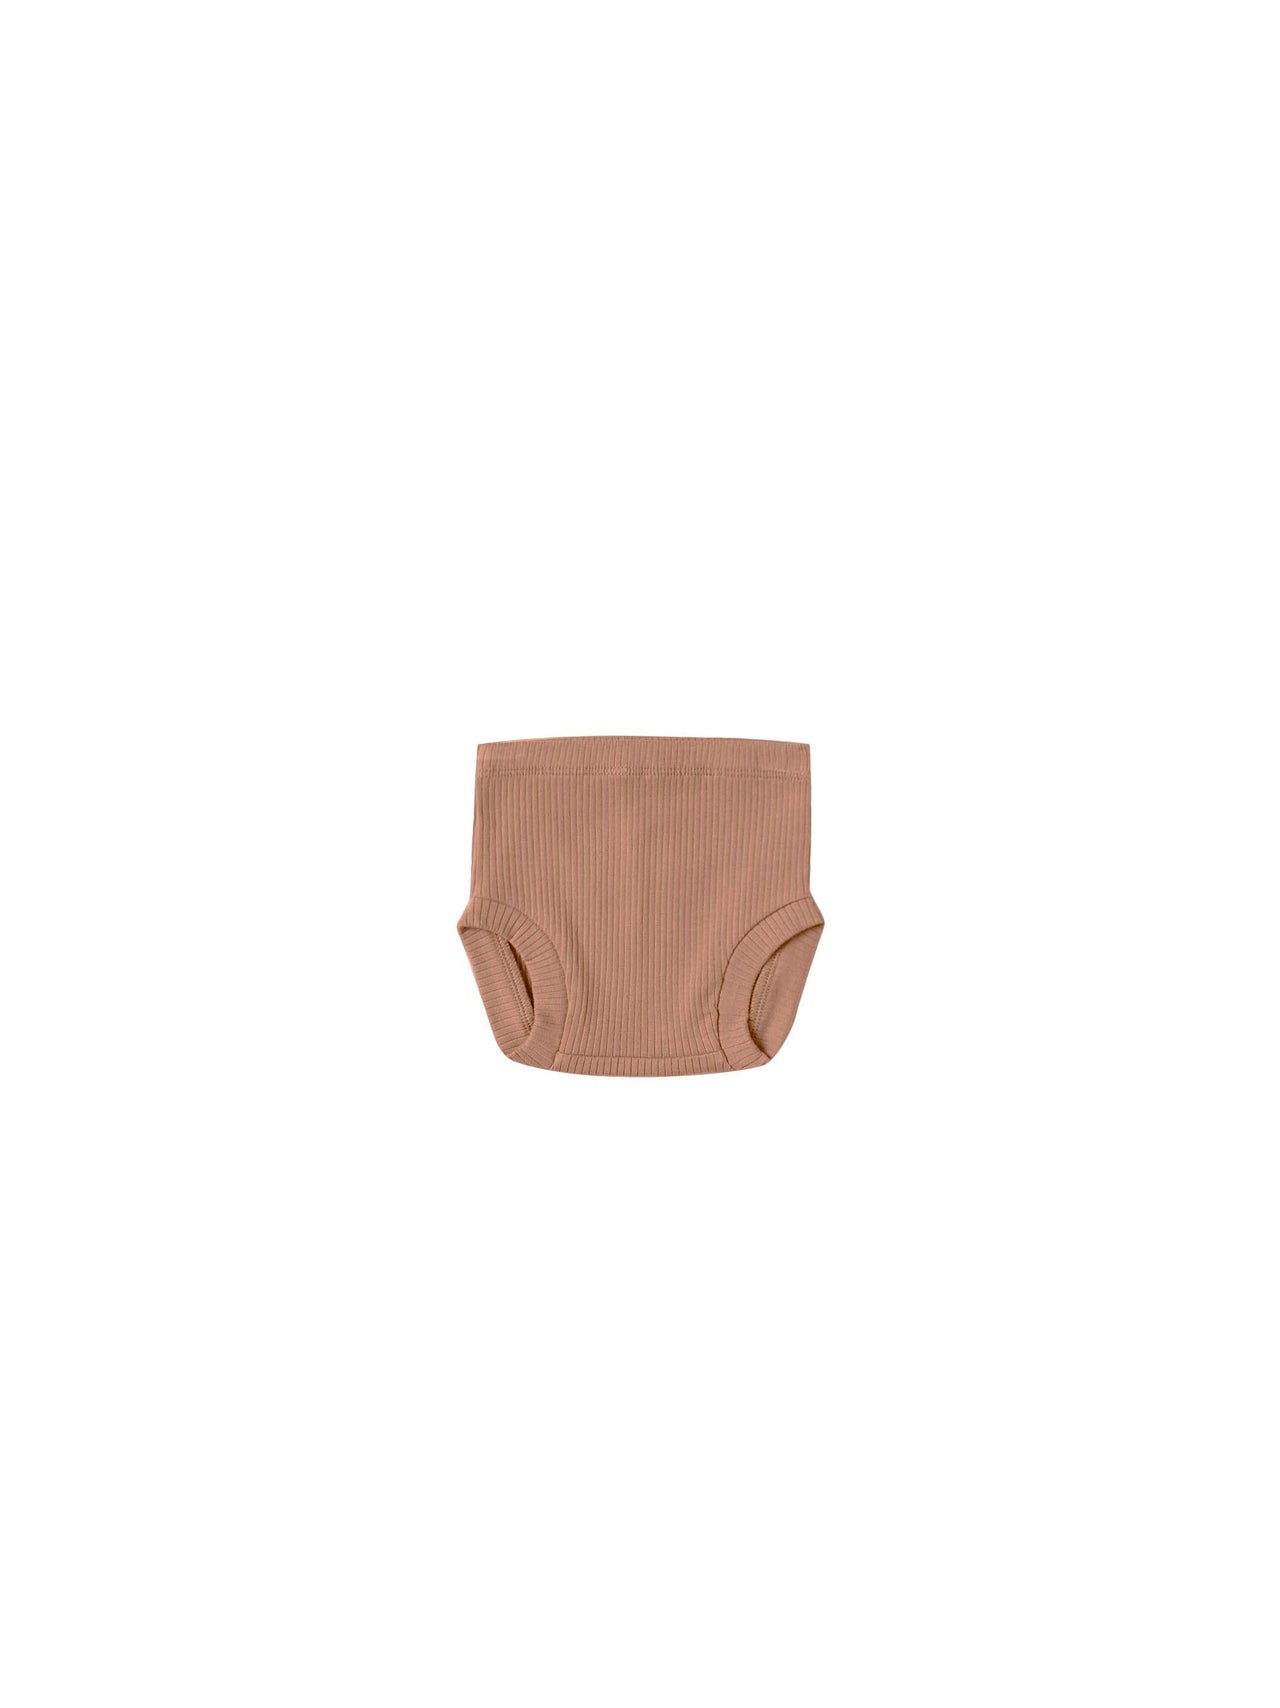 Quincy Mae Organic Ribbed Bloomers, Terracotta